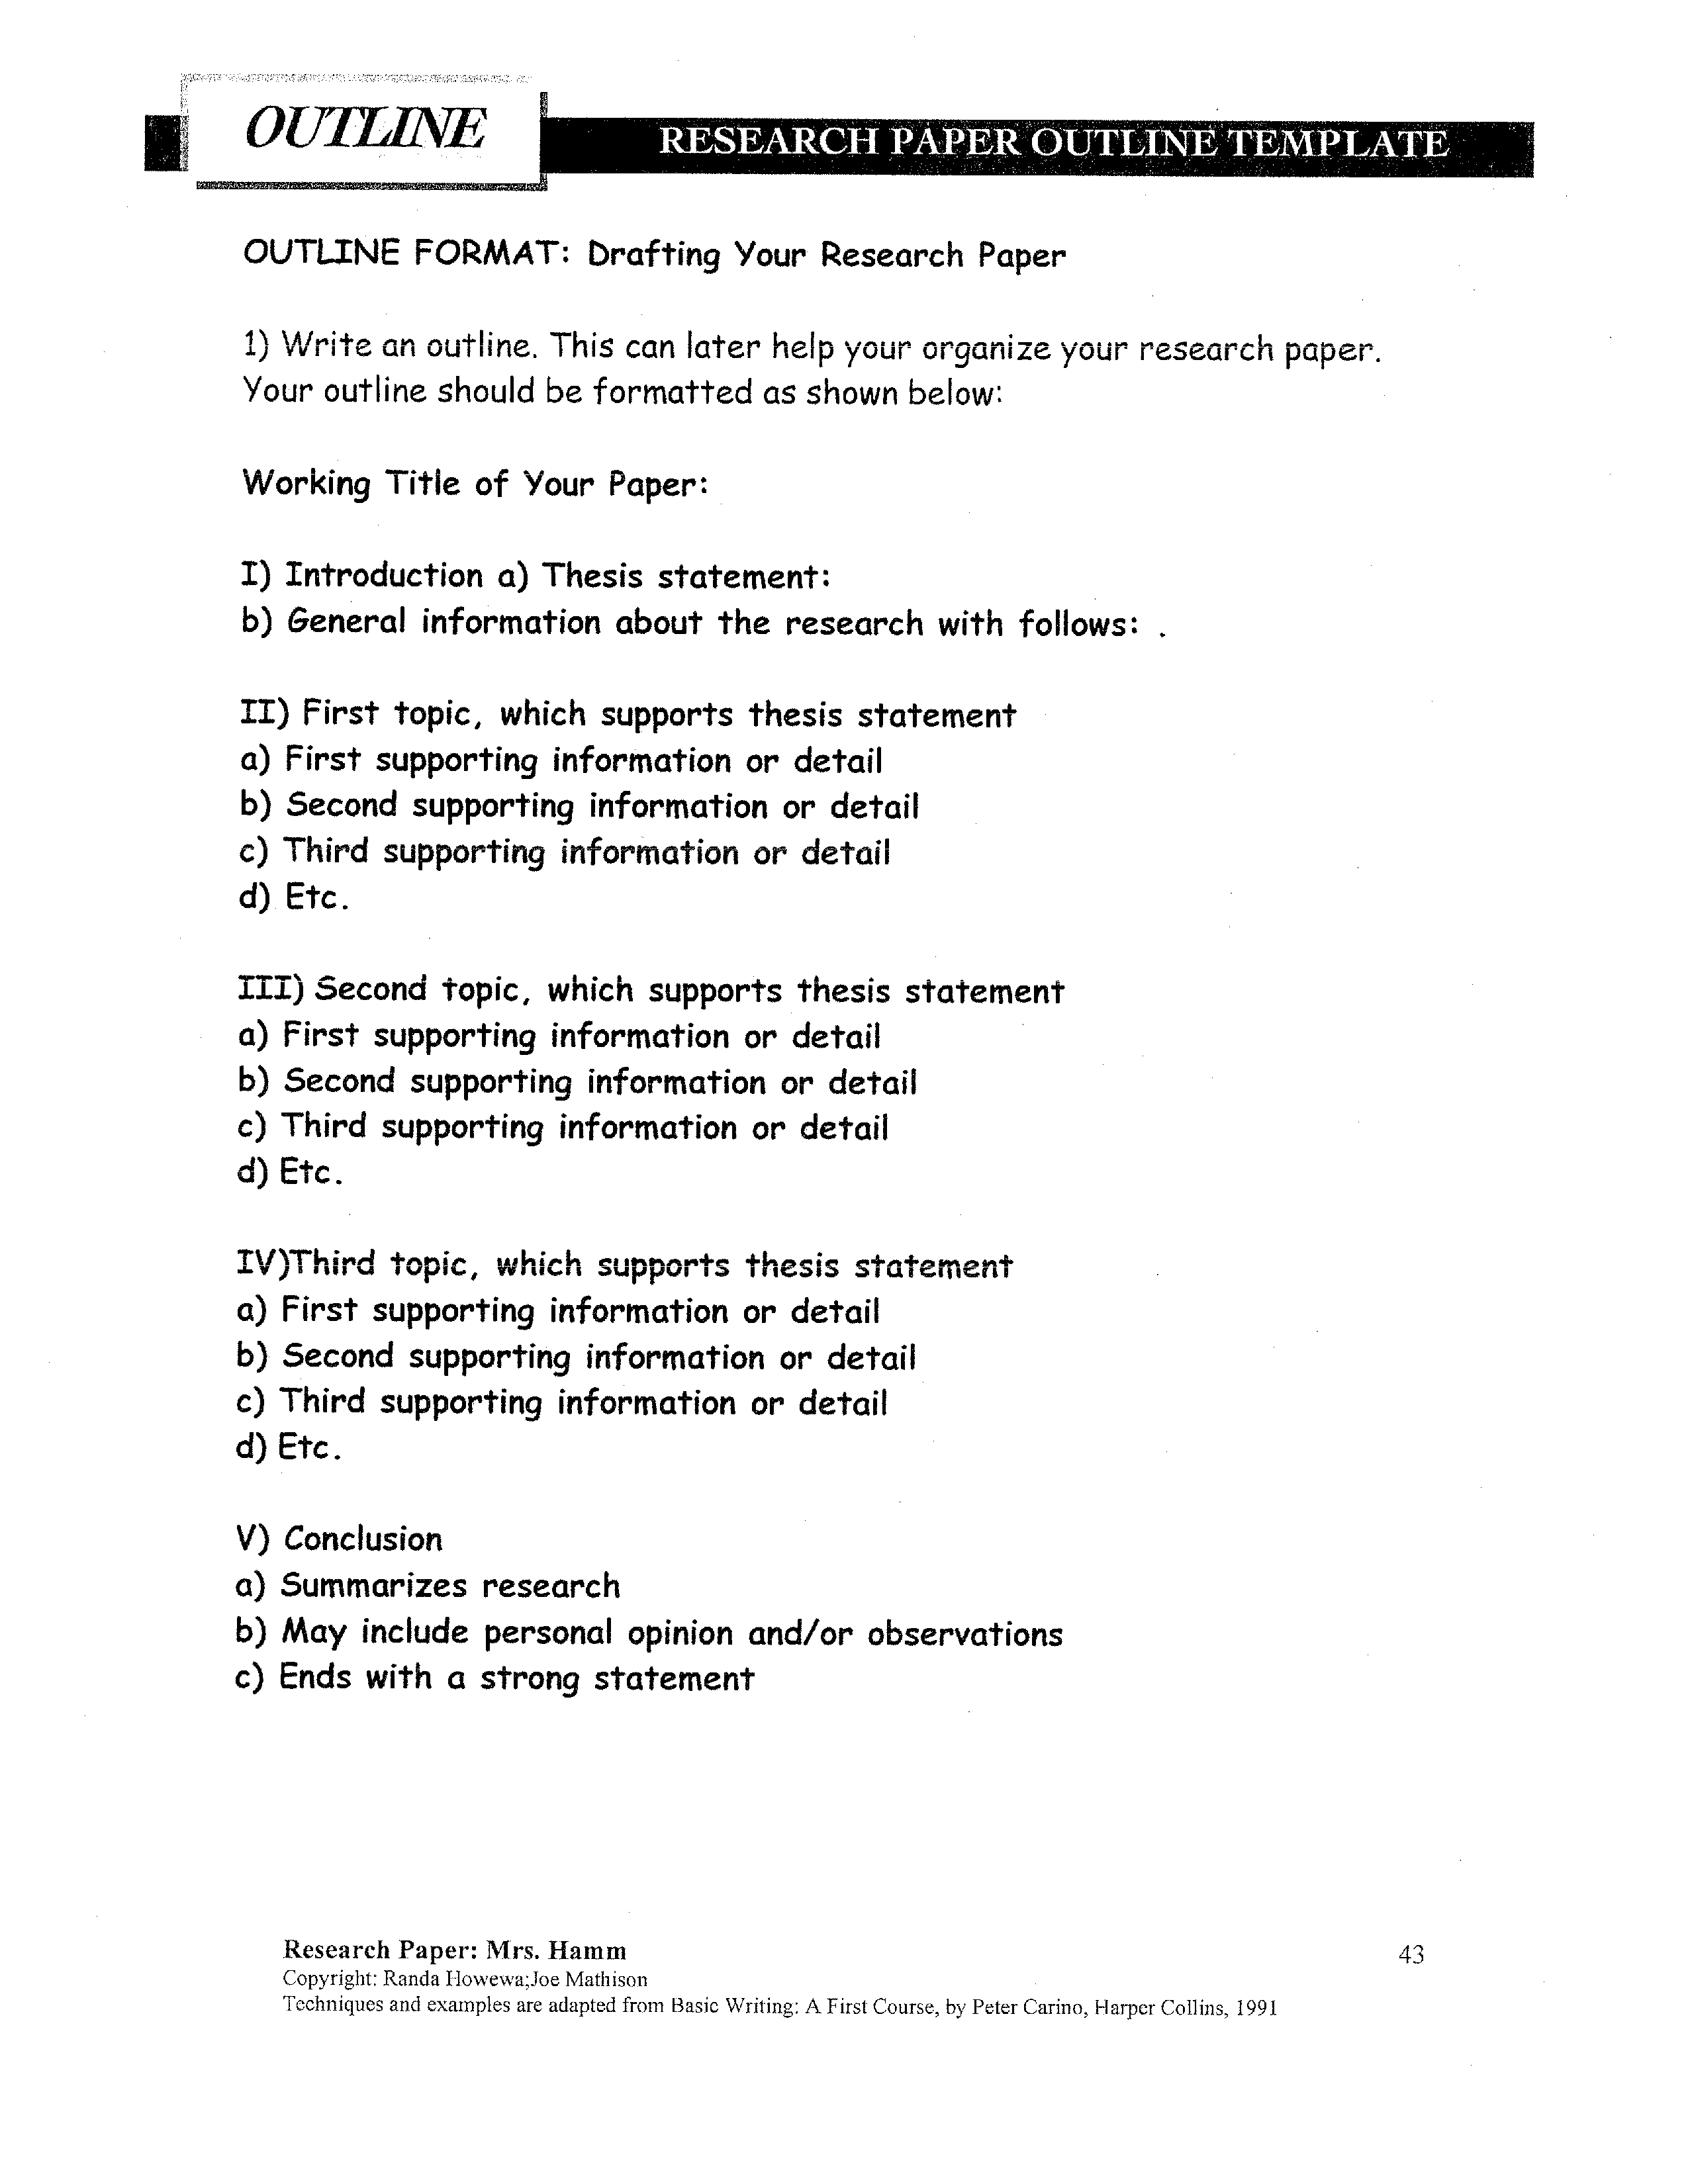 draft outline of a research paper